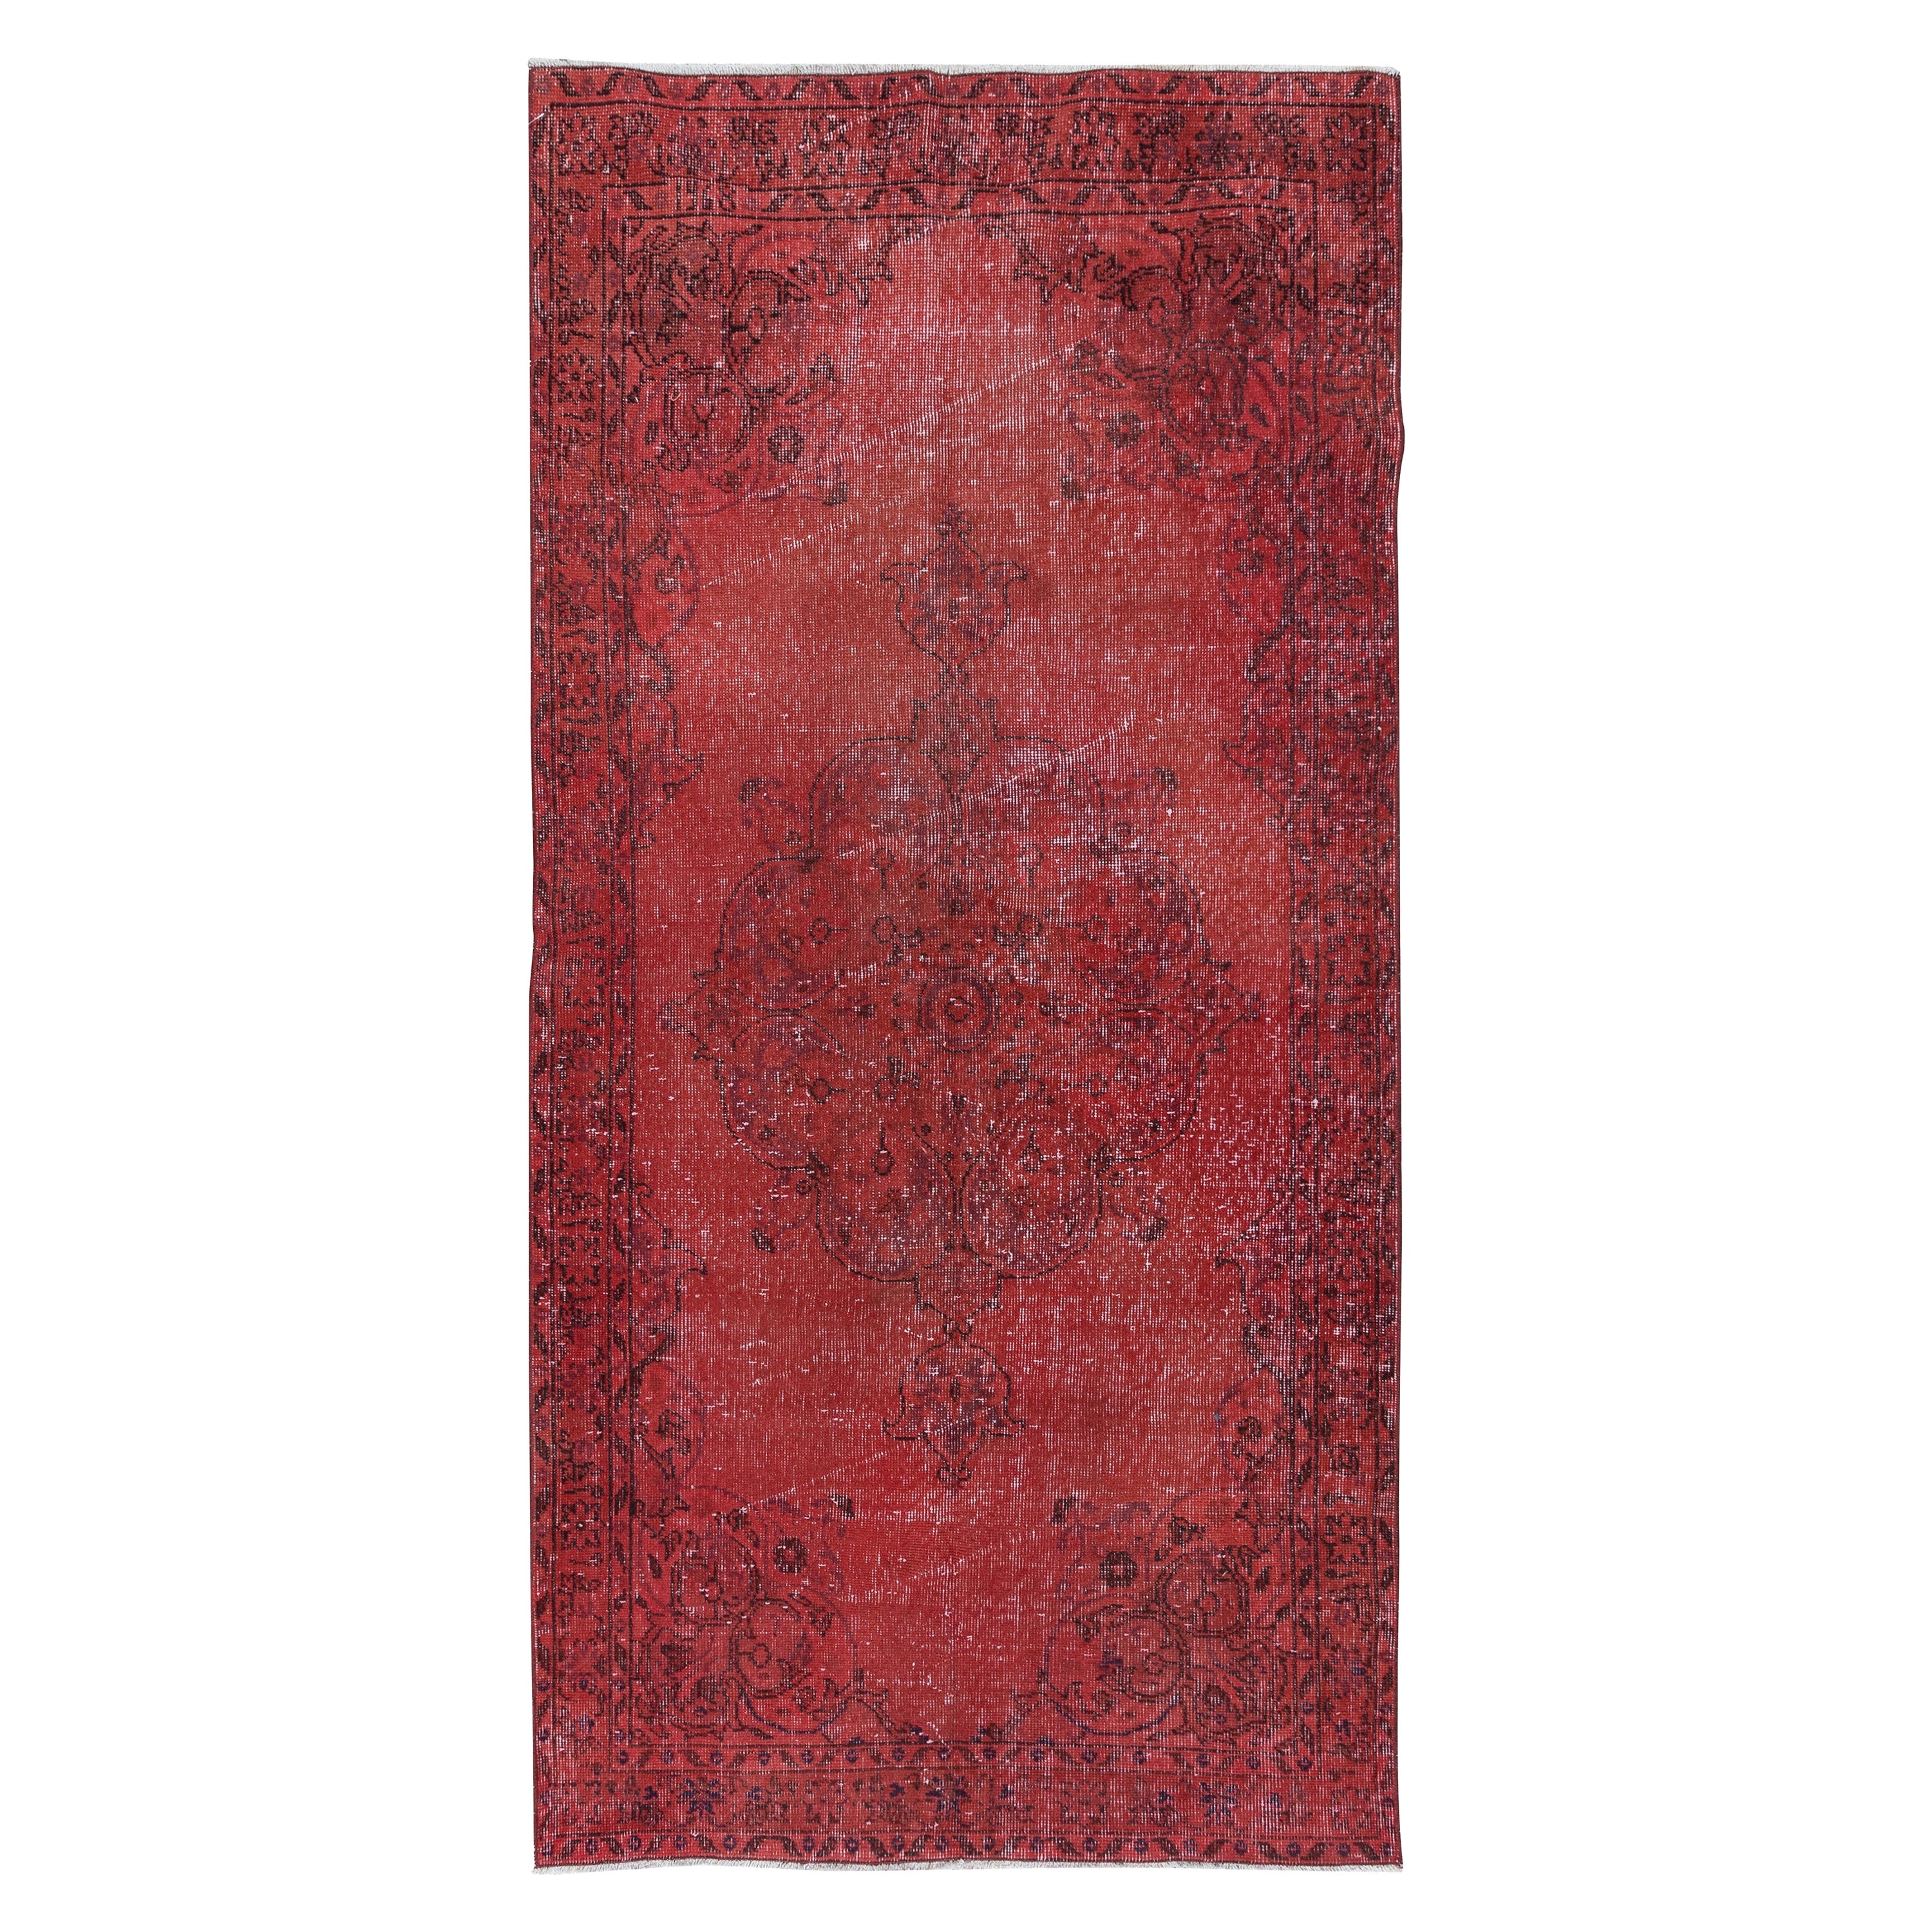 3.8x7.8 Ft Red Modern Handmade Turkish Accent Rug for Entryway & Kitchen